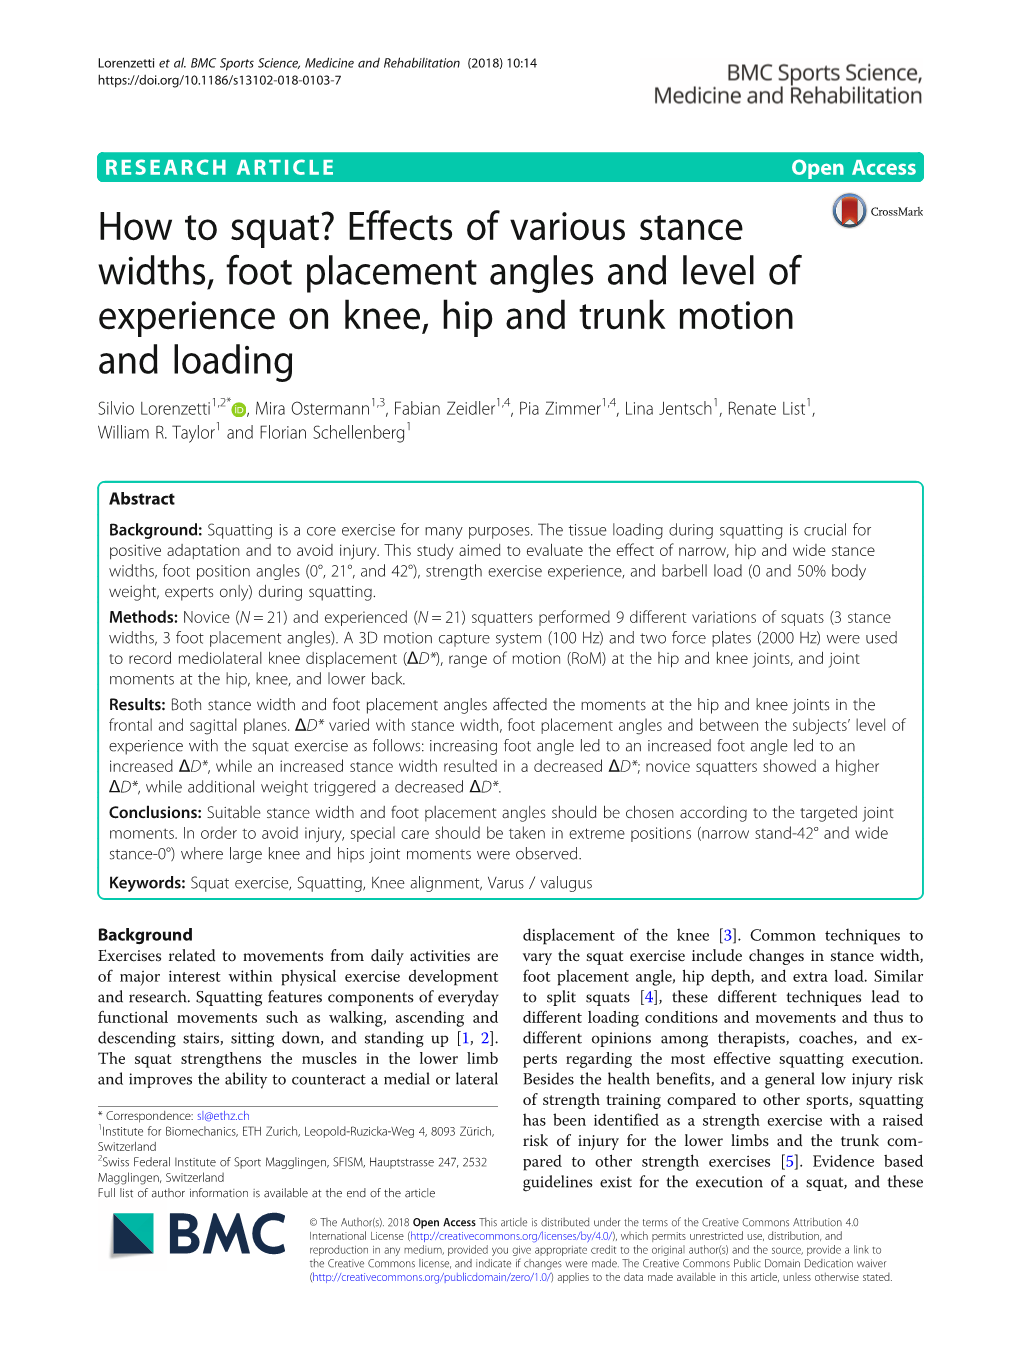 How to Squat? Effects of Various Stance Widths, Foot Placement